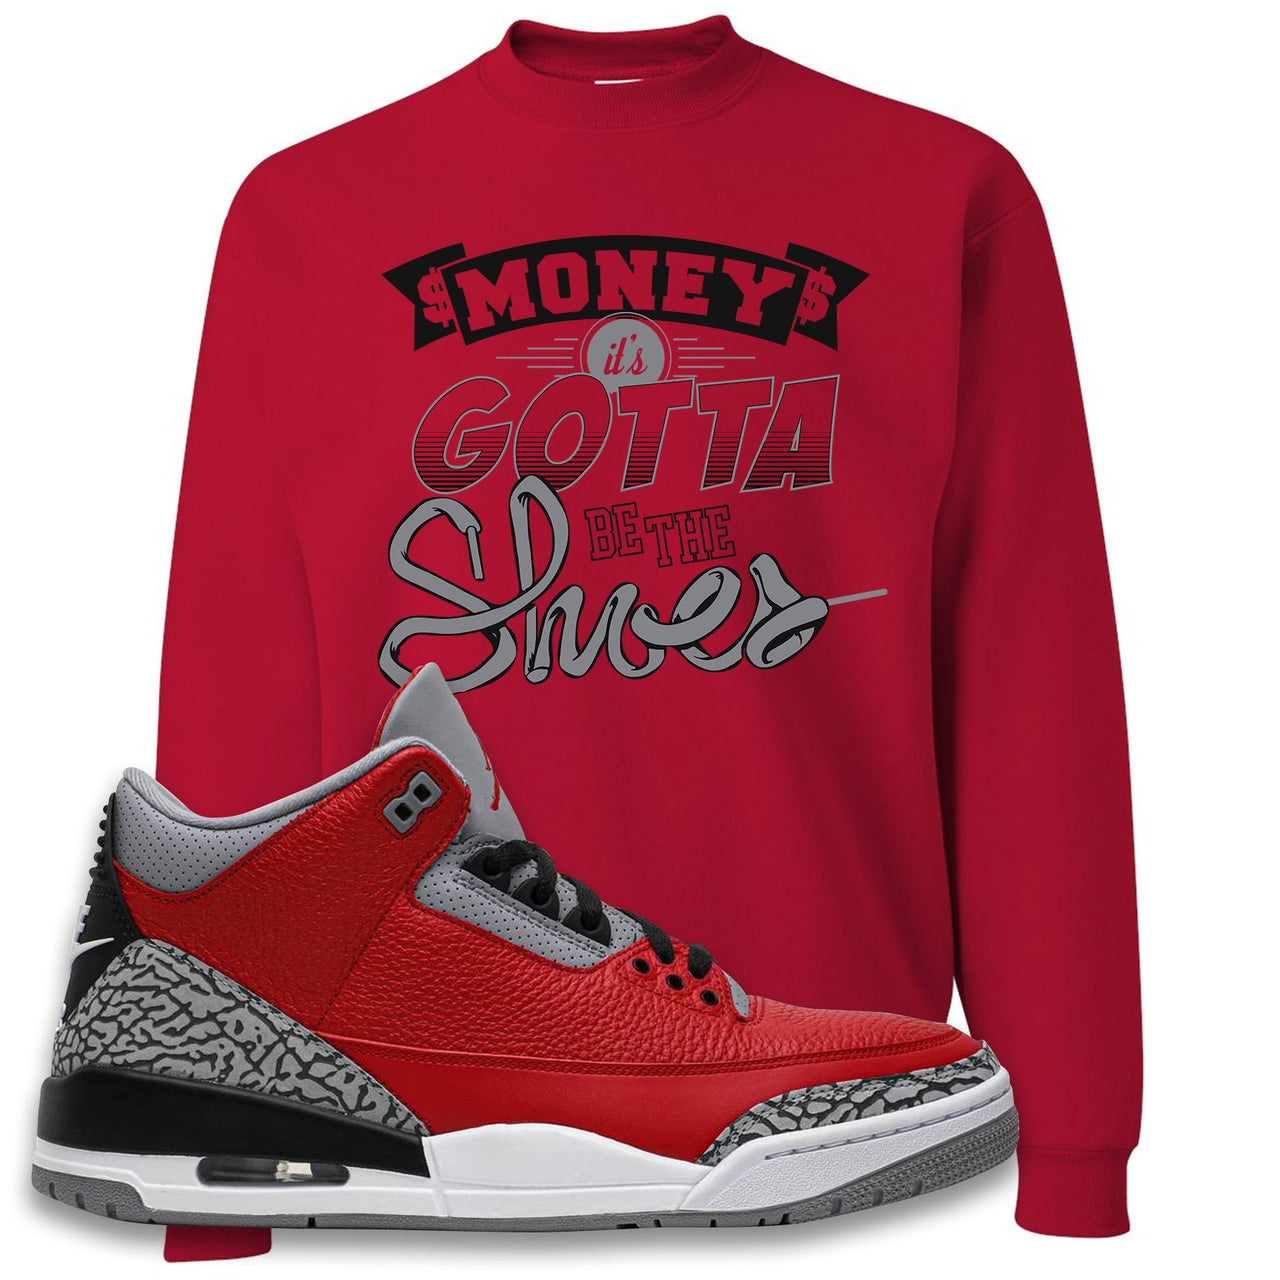 Chicago Exclusive Jordan 3 Red Cement Sneaker True Red Crewneck Sweatshirt | Crewneck to match Jordan 3 All Star Red Cement Shoes | Money Its The Shoes